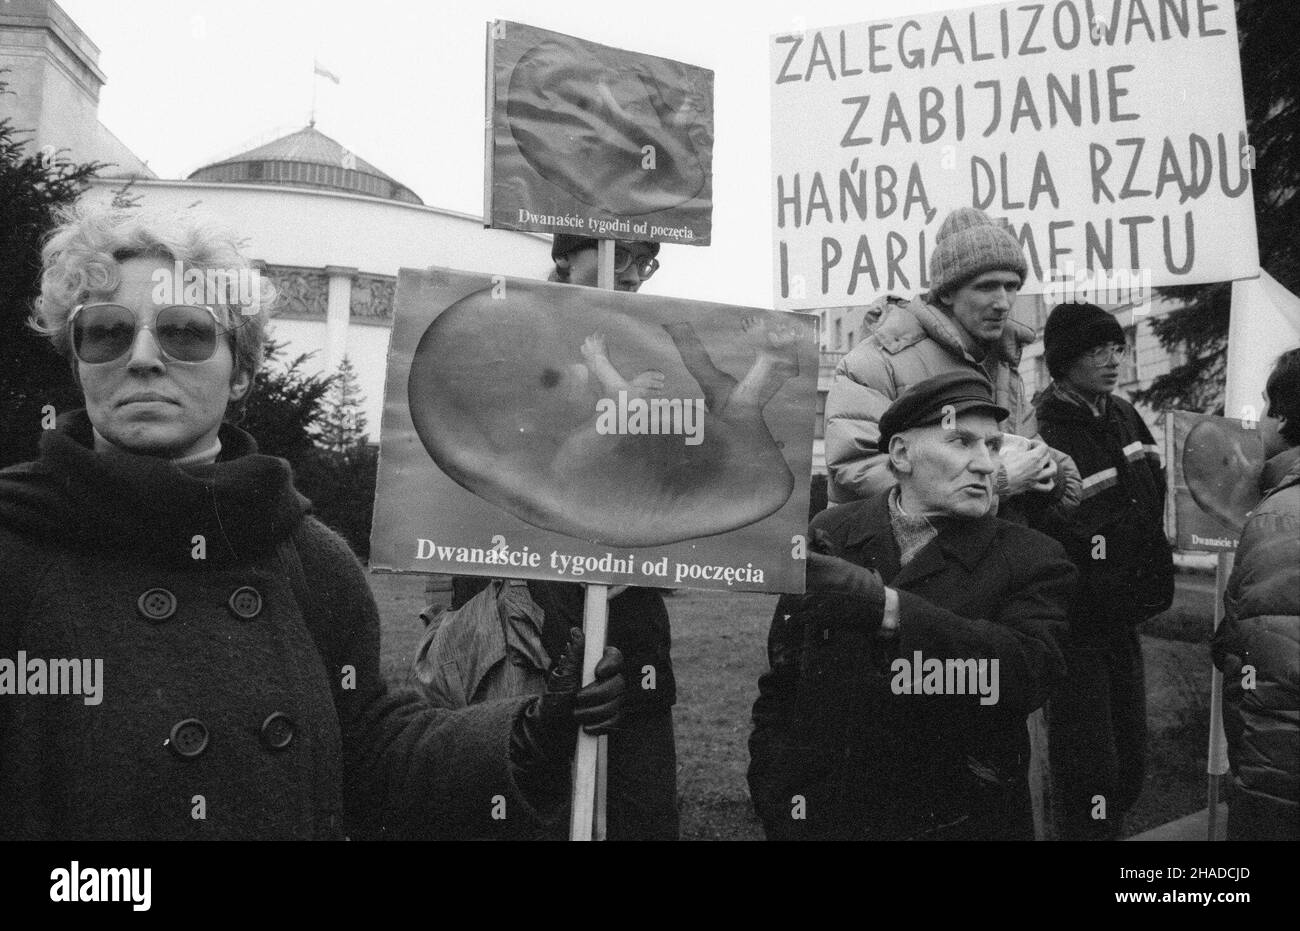 Warszawa, 24.01.1991. Pod Sejmem zosta³a zorganizowana demonstracja w obronie poczêtych dzieci. (ptr) PAP/CAF/Teodor Walczak      Warsaw, 24.01.1991. People wave banners reading 'Legalized killing is a shame for the government and the parliament' during a demonstration in defence of unborn children (nasciturus) near the Sejm in Warsaw. (ptr) PAP/CAF/Teodor Walczak Stock Photo